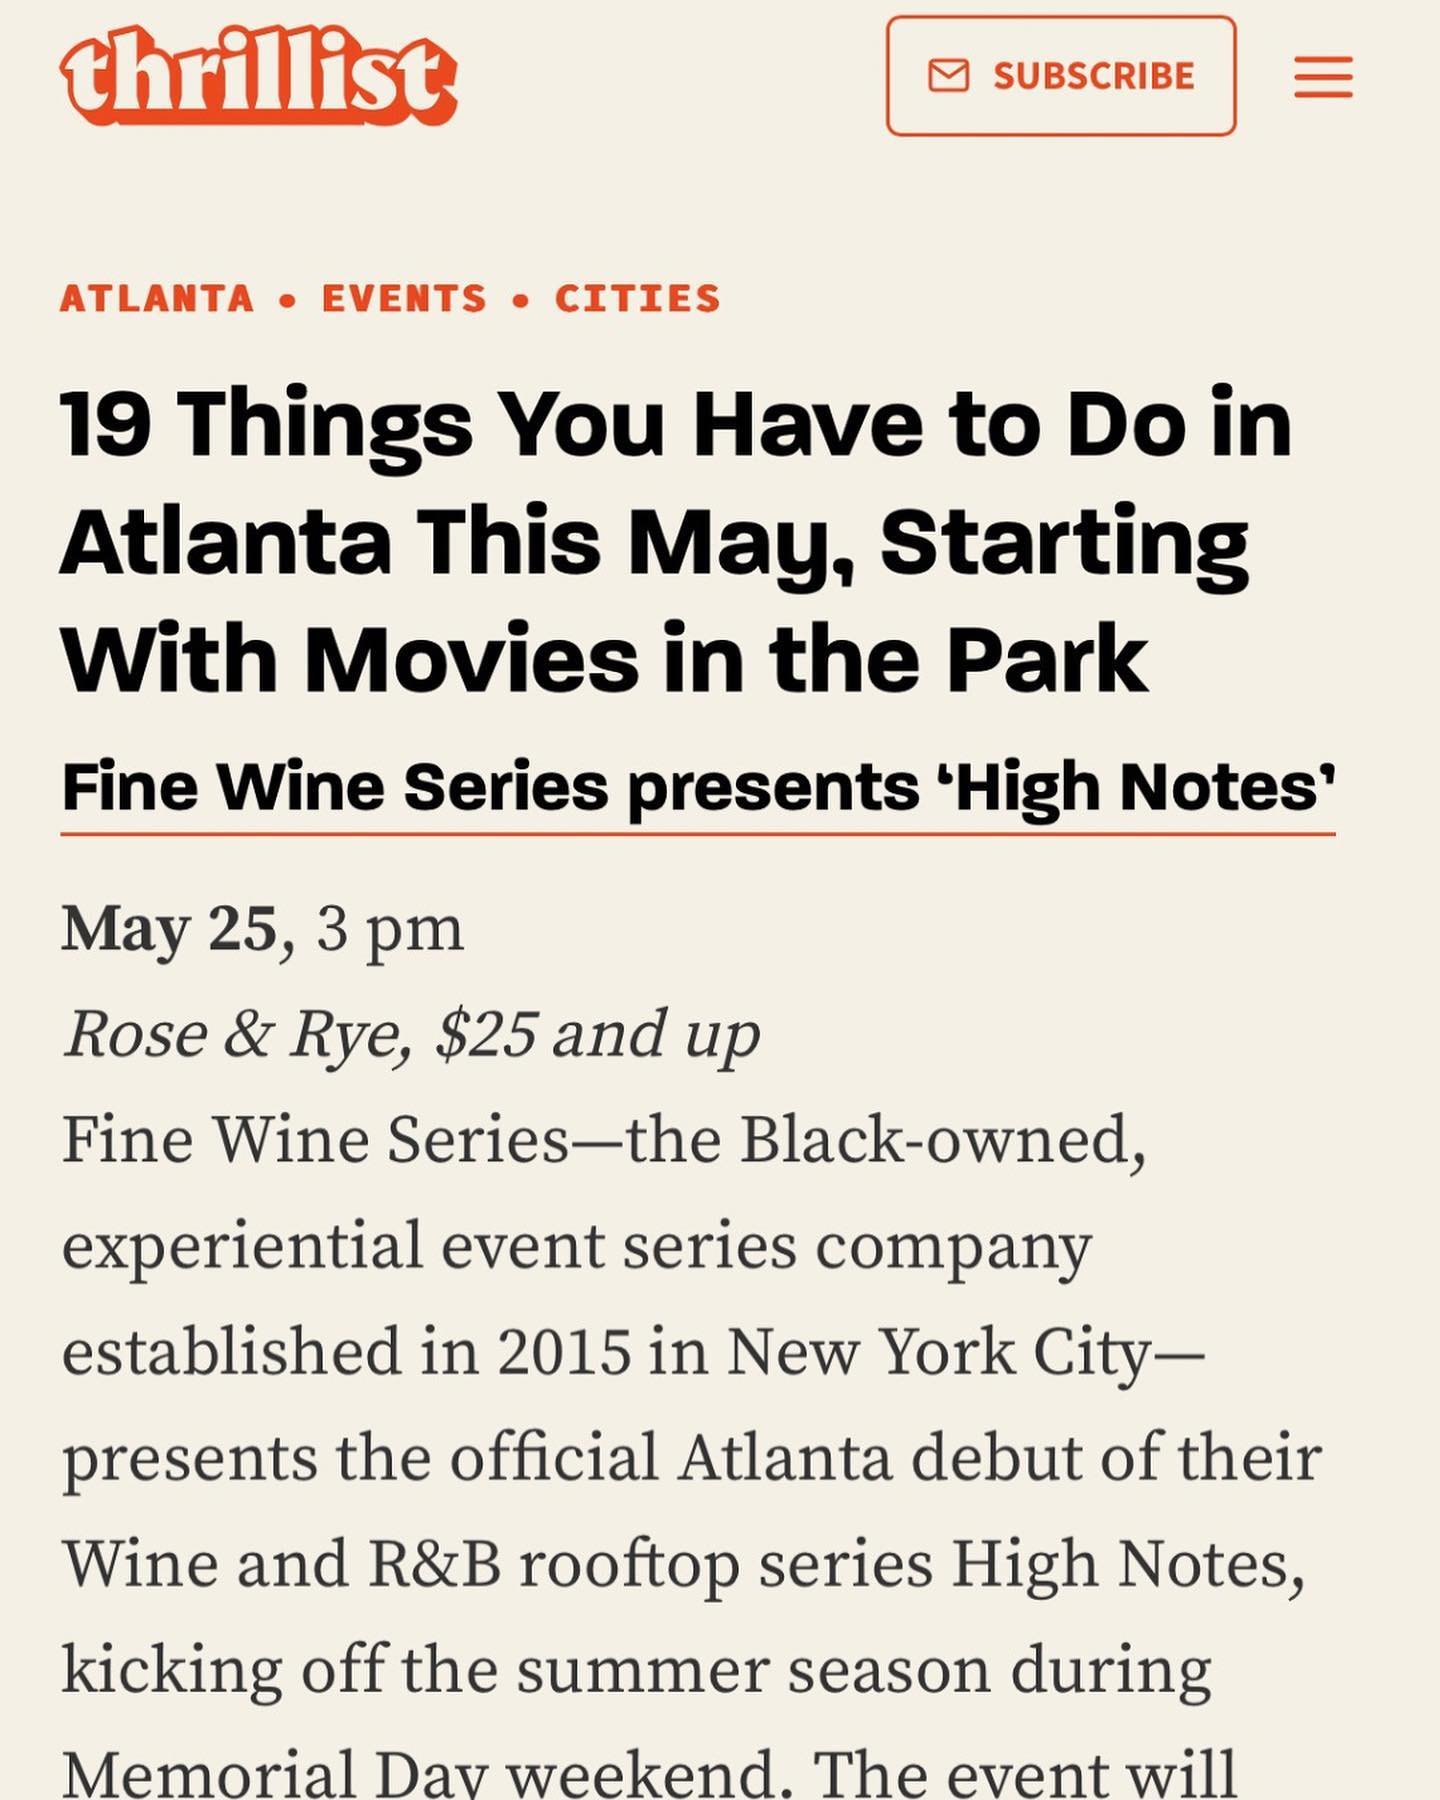 Thank you @thrillist for the feature! Memorial Day Weekend in Atlanta is going to be special🥂 

The Official Atlanta Debut of High Notes 🍷🎶 by Fine Wine Series! We&rsquo;re celebrating with complimentary wine cocktails, the cities best R&amp;B DJs